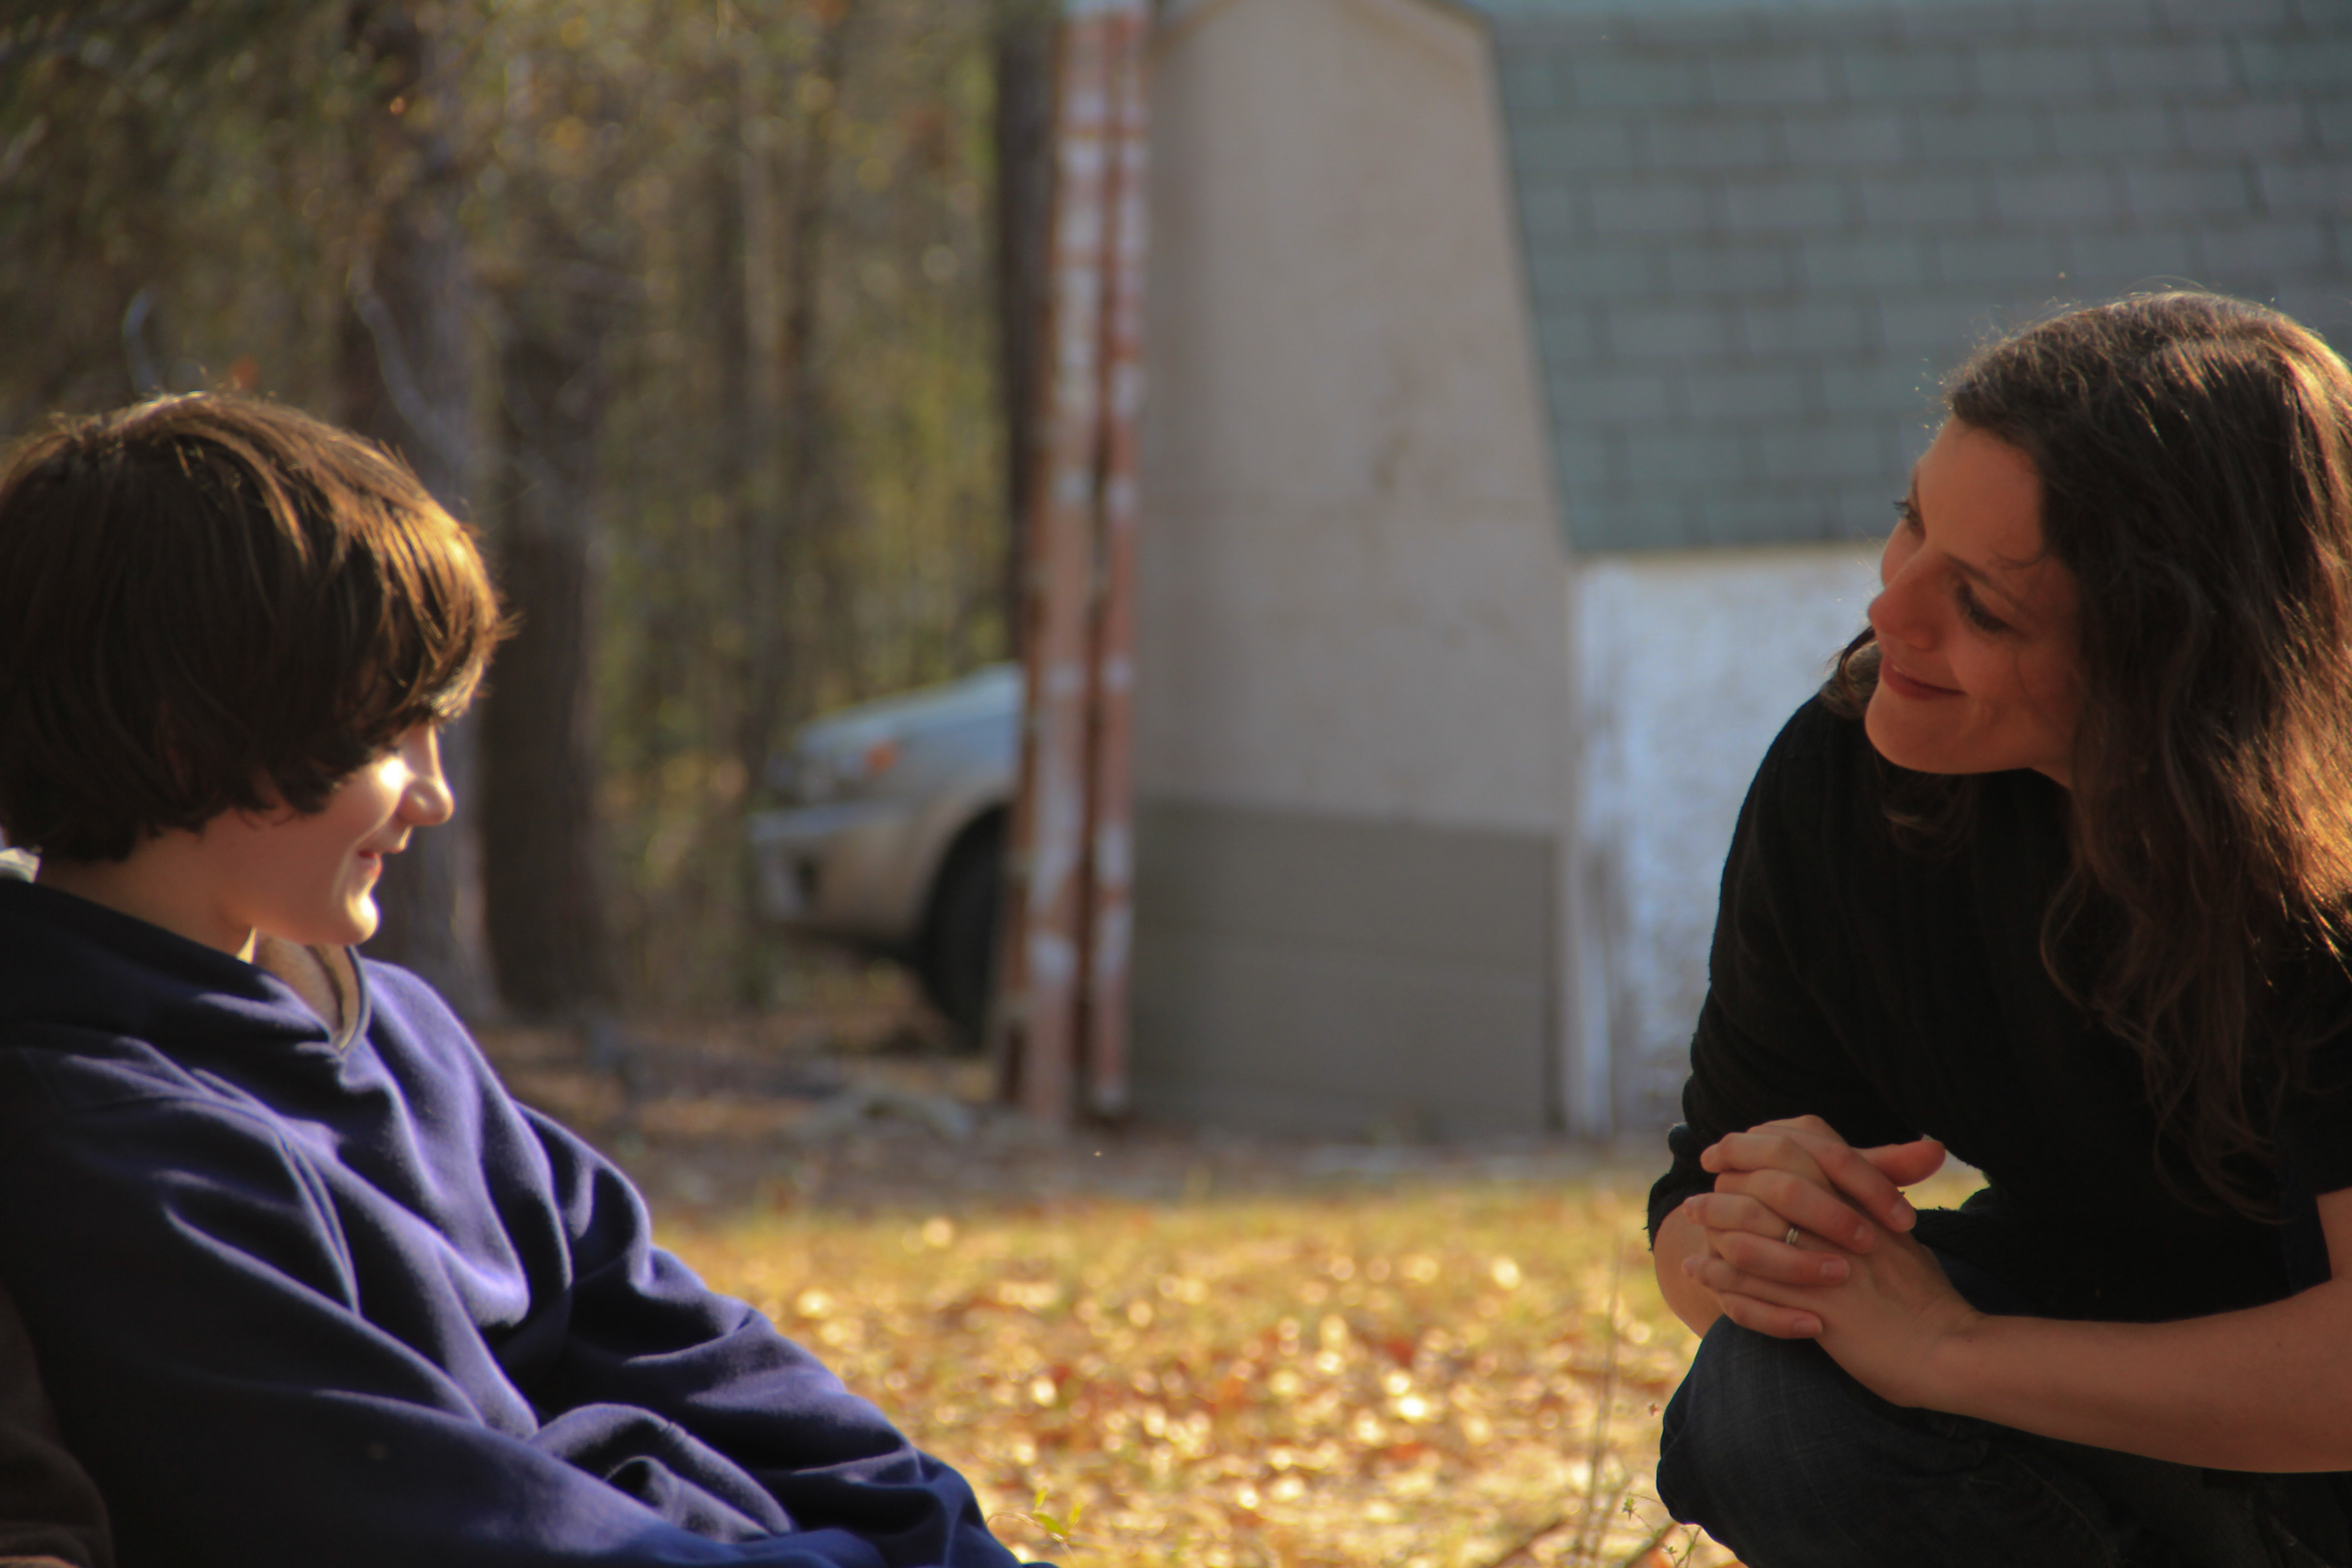 Director Emilie McDonald speaking to actor Tyler Williams during CROSSING THE RIVER shoot